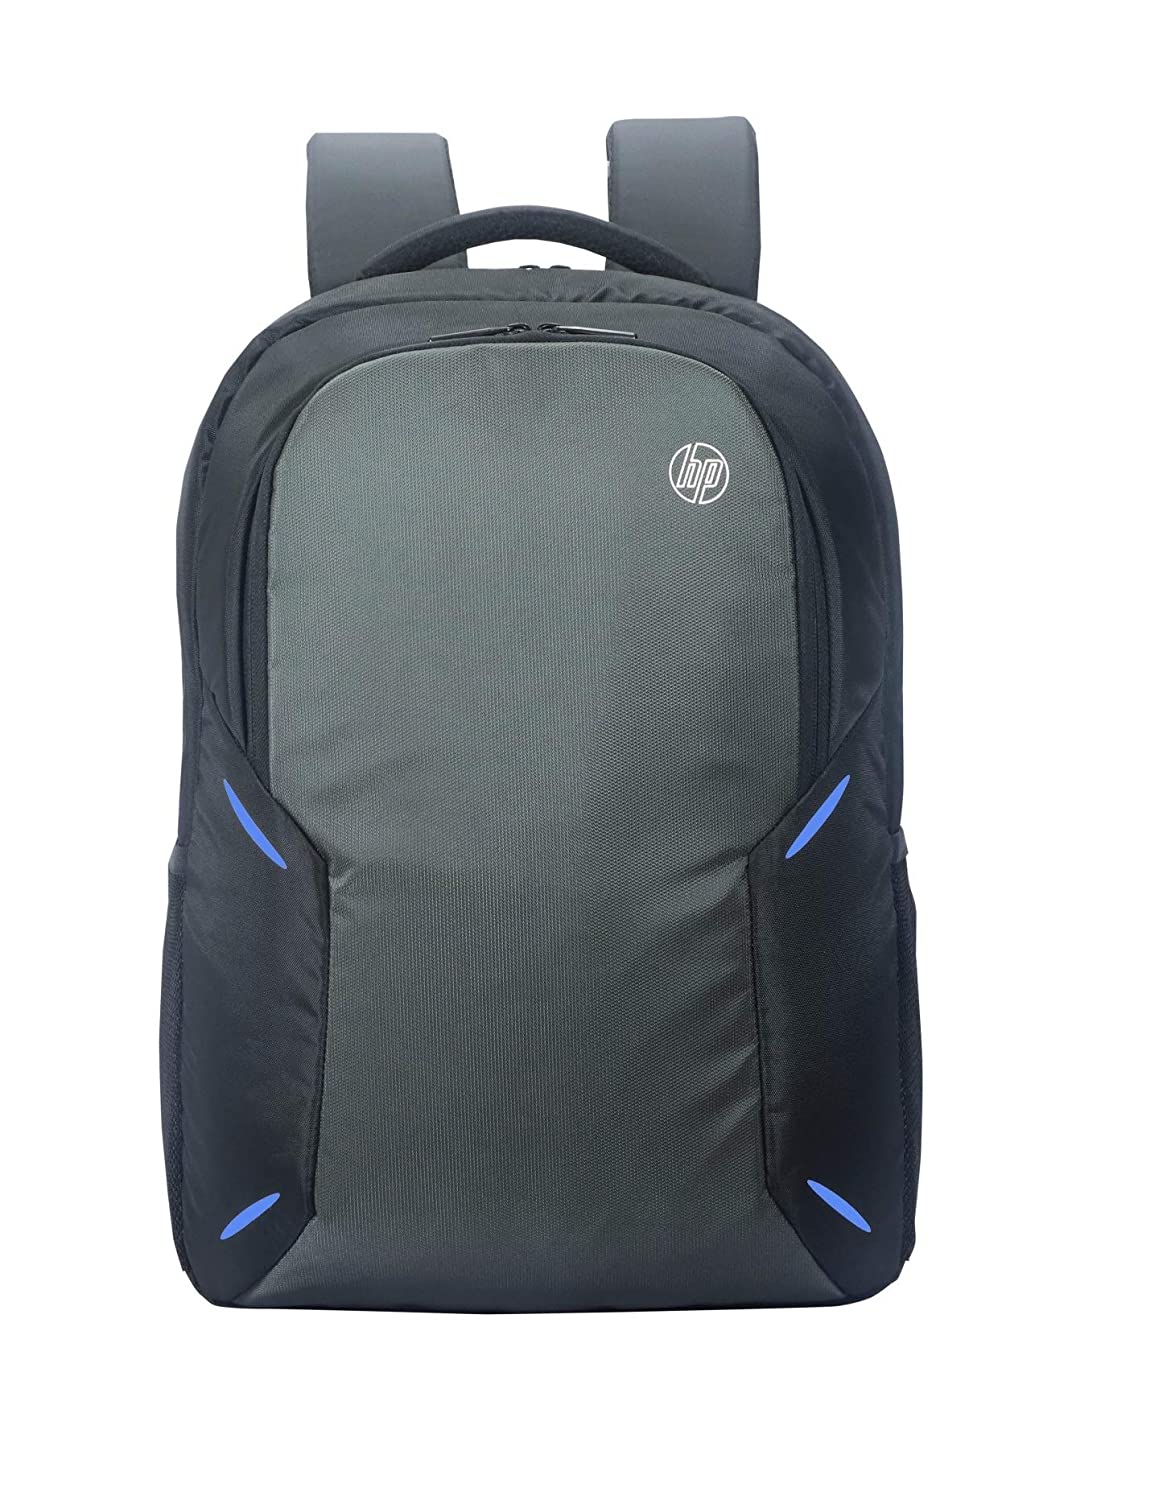 HP Premium HP-W2N96PA 15.6-inch Laptop Backpack (Blue/Grey) - Buy HP  Premium HP-W2N96PA 15.6-inch Laptop Backpack (Blue/Grey) Online at Low  Price in India - Amazon.in